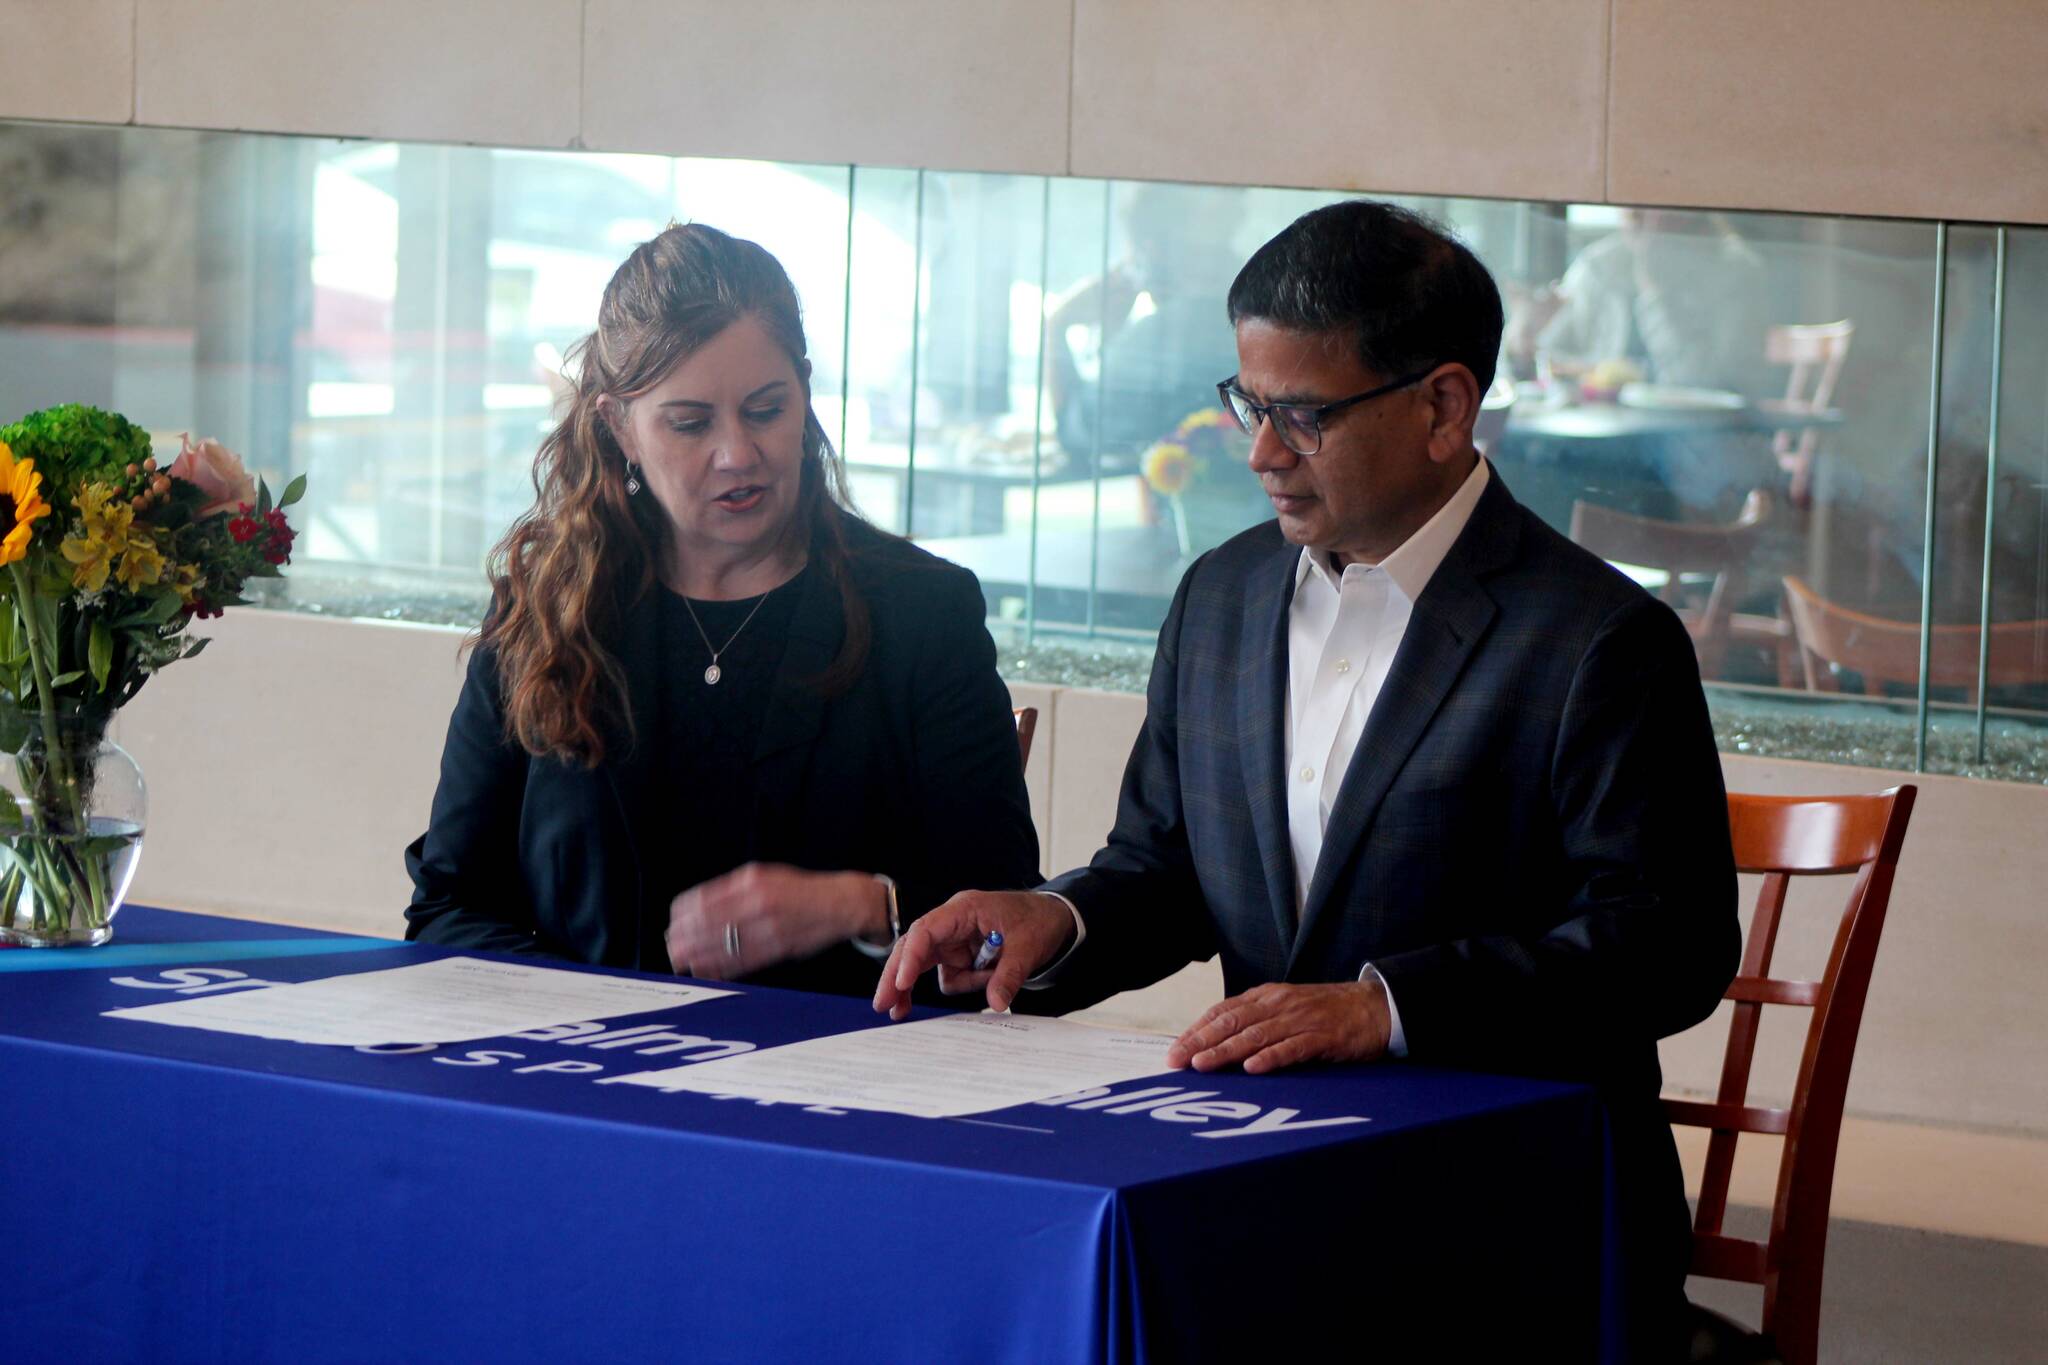 Snoqualmie Valley Health CEO Renee Jensen, left, and Shalabh Chandra, president of Spacelabs Healthcare, sign a parternship agreement at Snoqualmie Valley Hospital on March 6. Photo Conor Wilson/Valley Record.